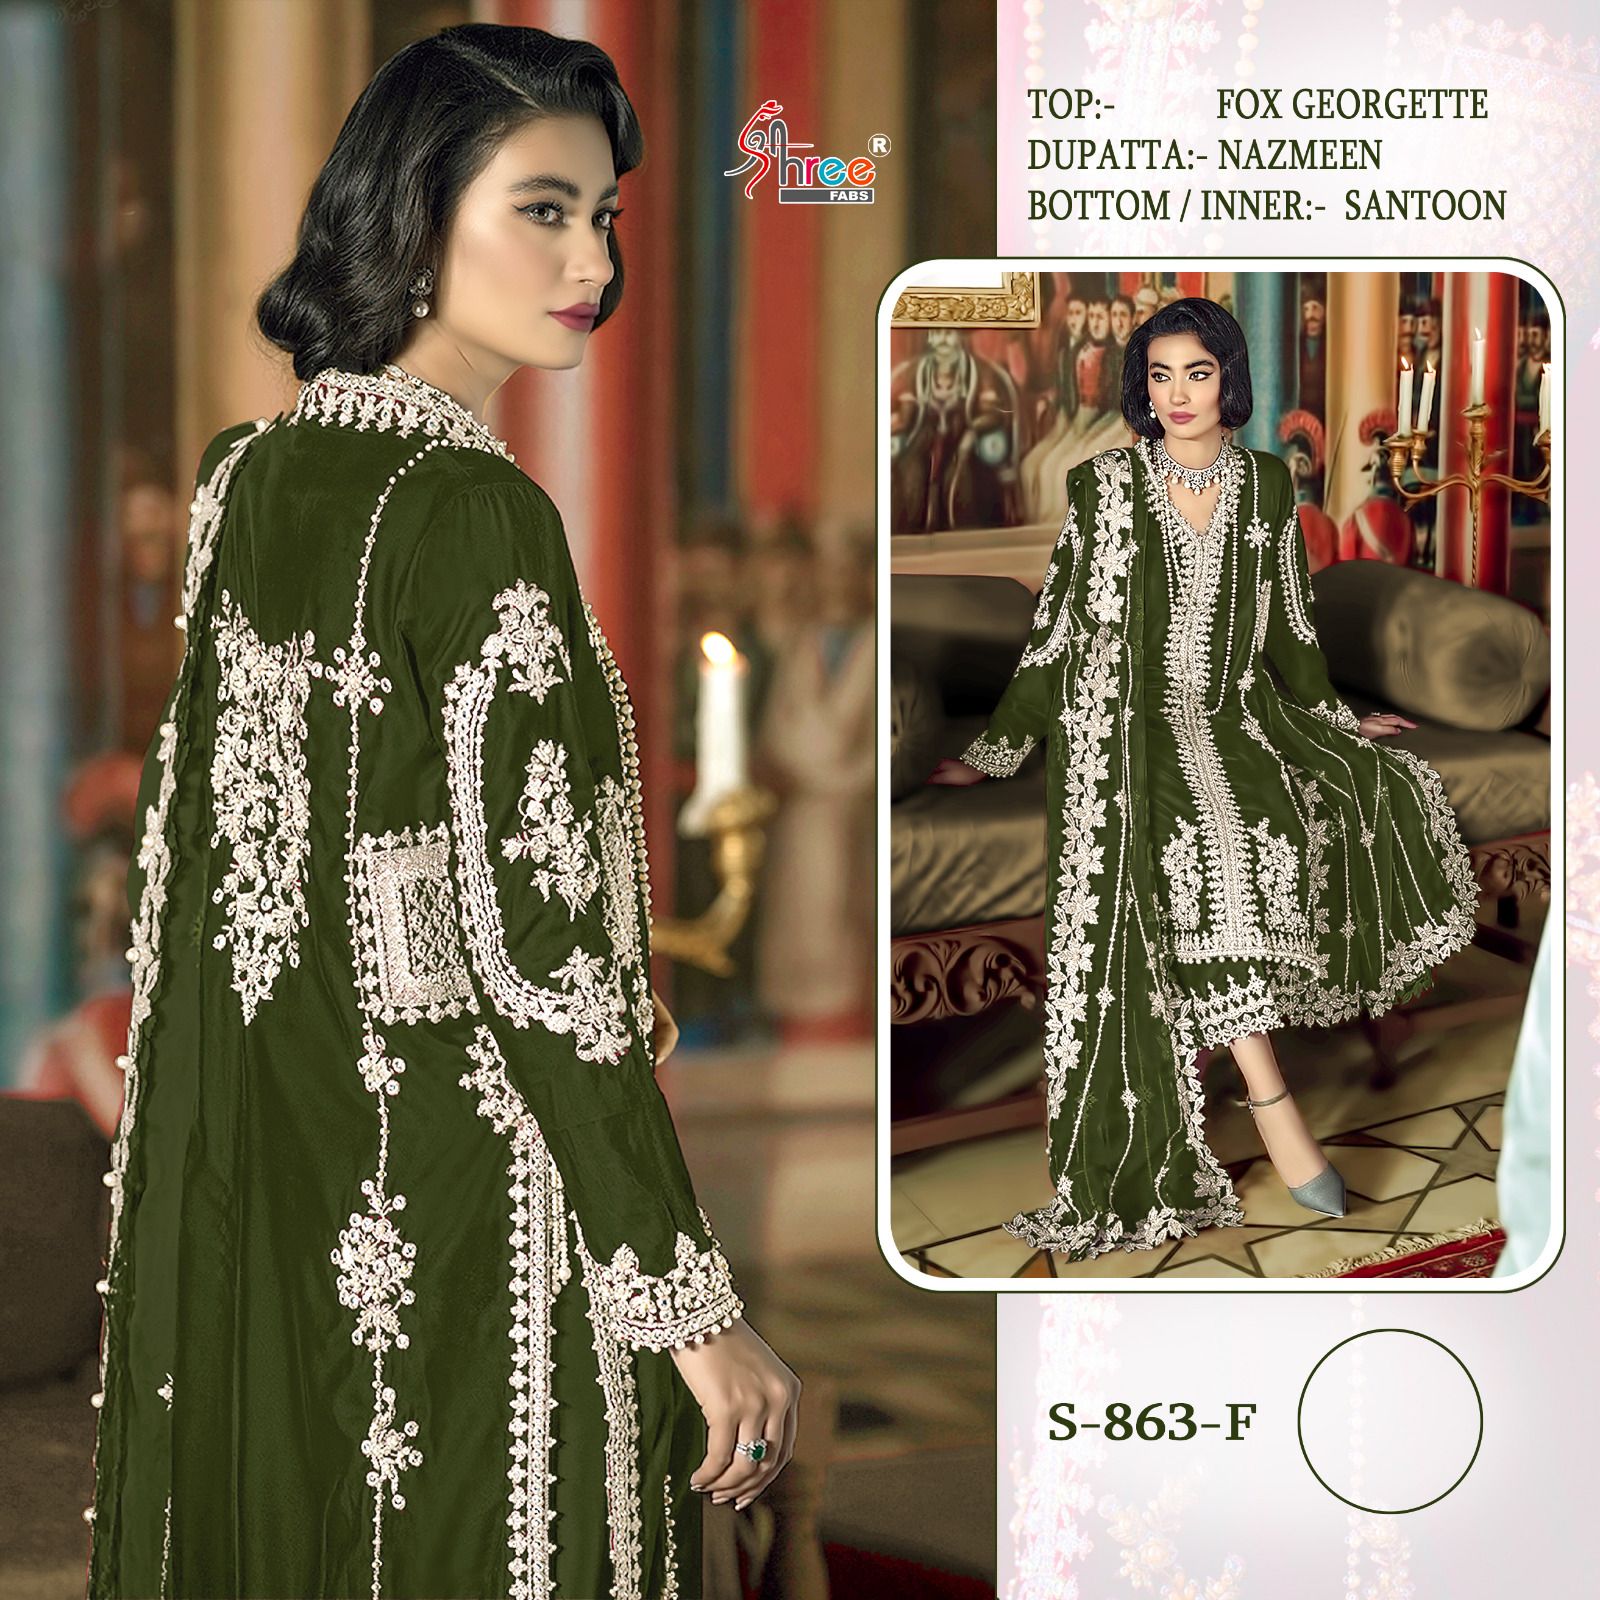 SHREE FABS S 863 F PAKISTANI SUITS IN INDIA